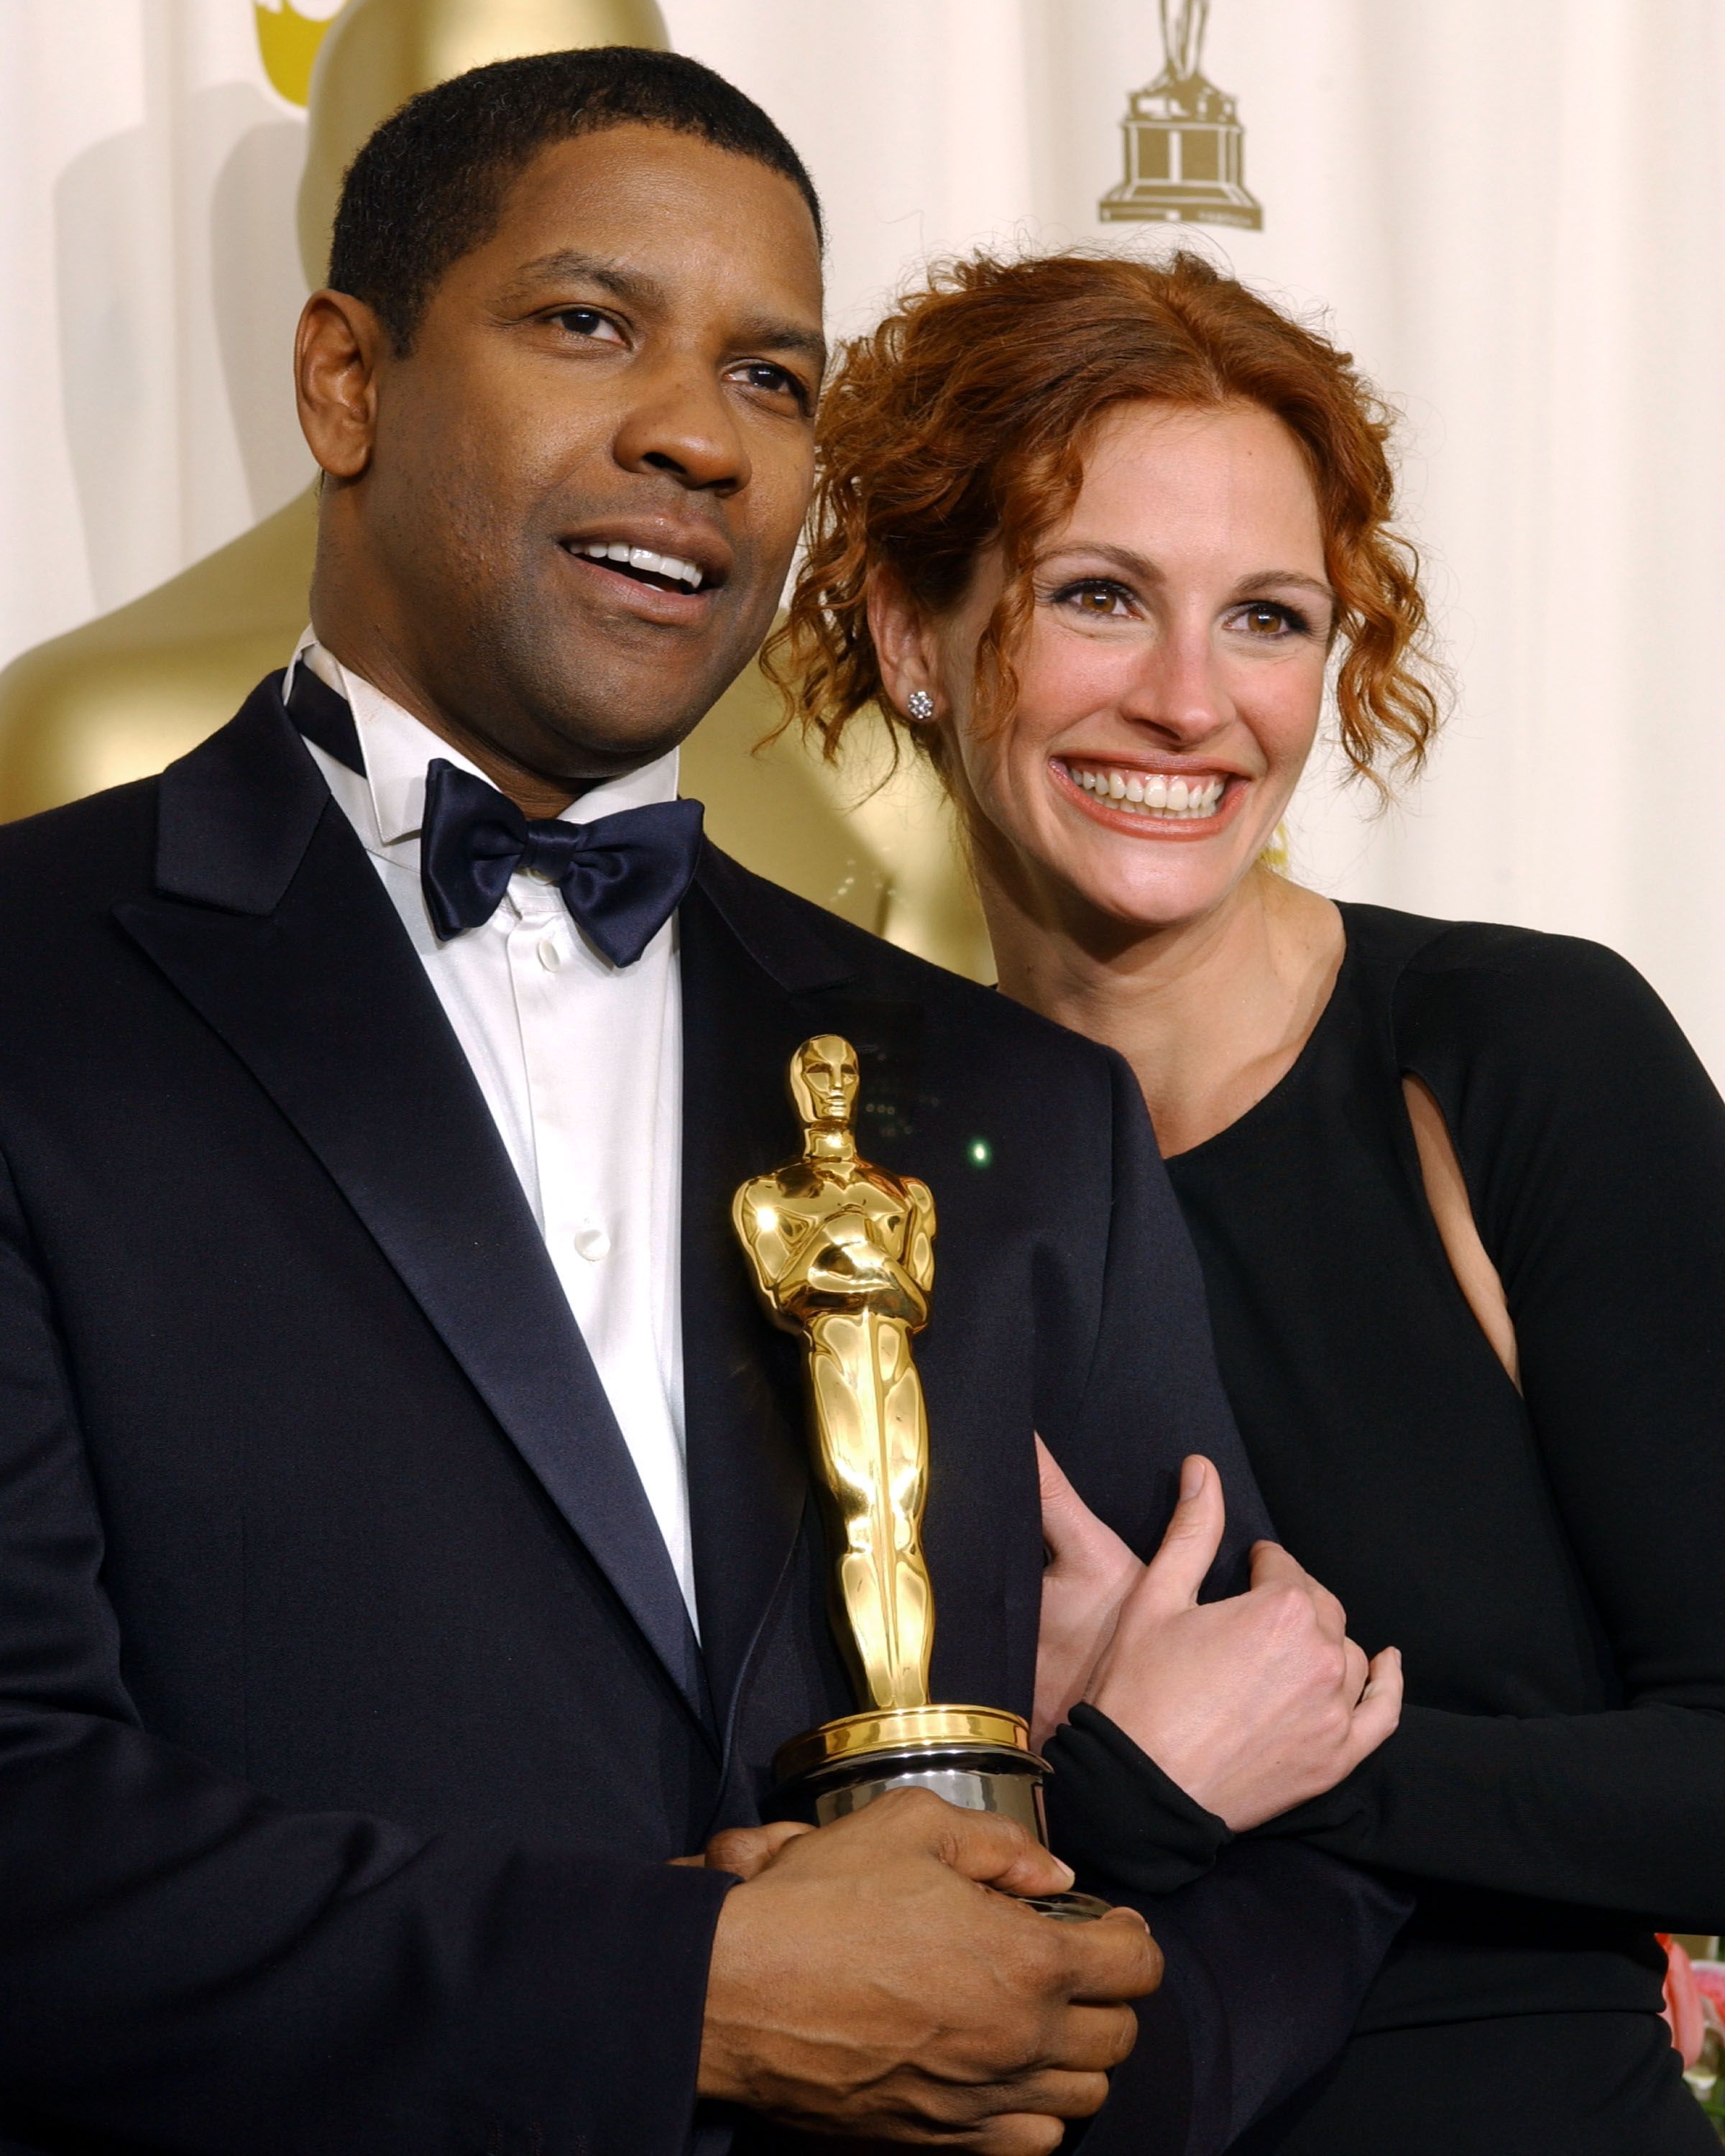 Denzel Washington and Julia Roberts at the 74th Annual Academy Awards in 2002 | Source: Getty Images